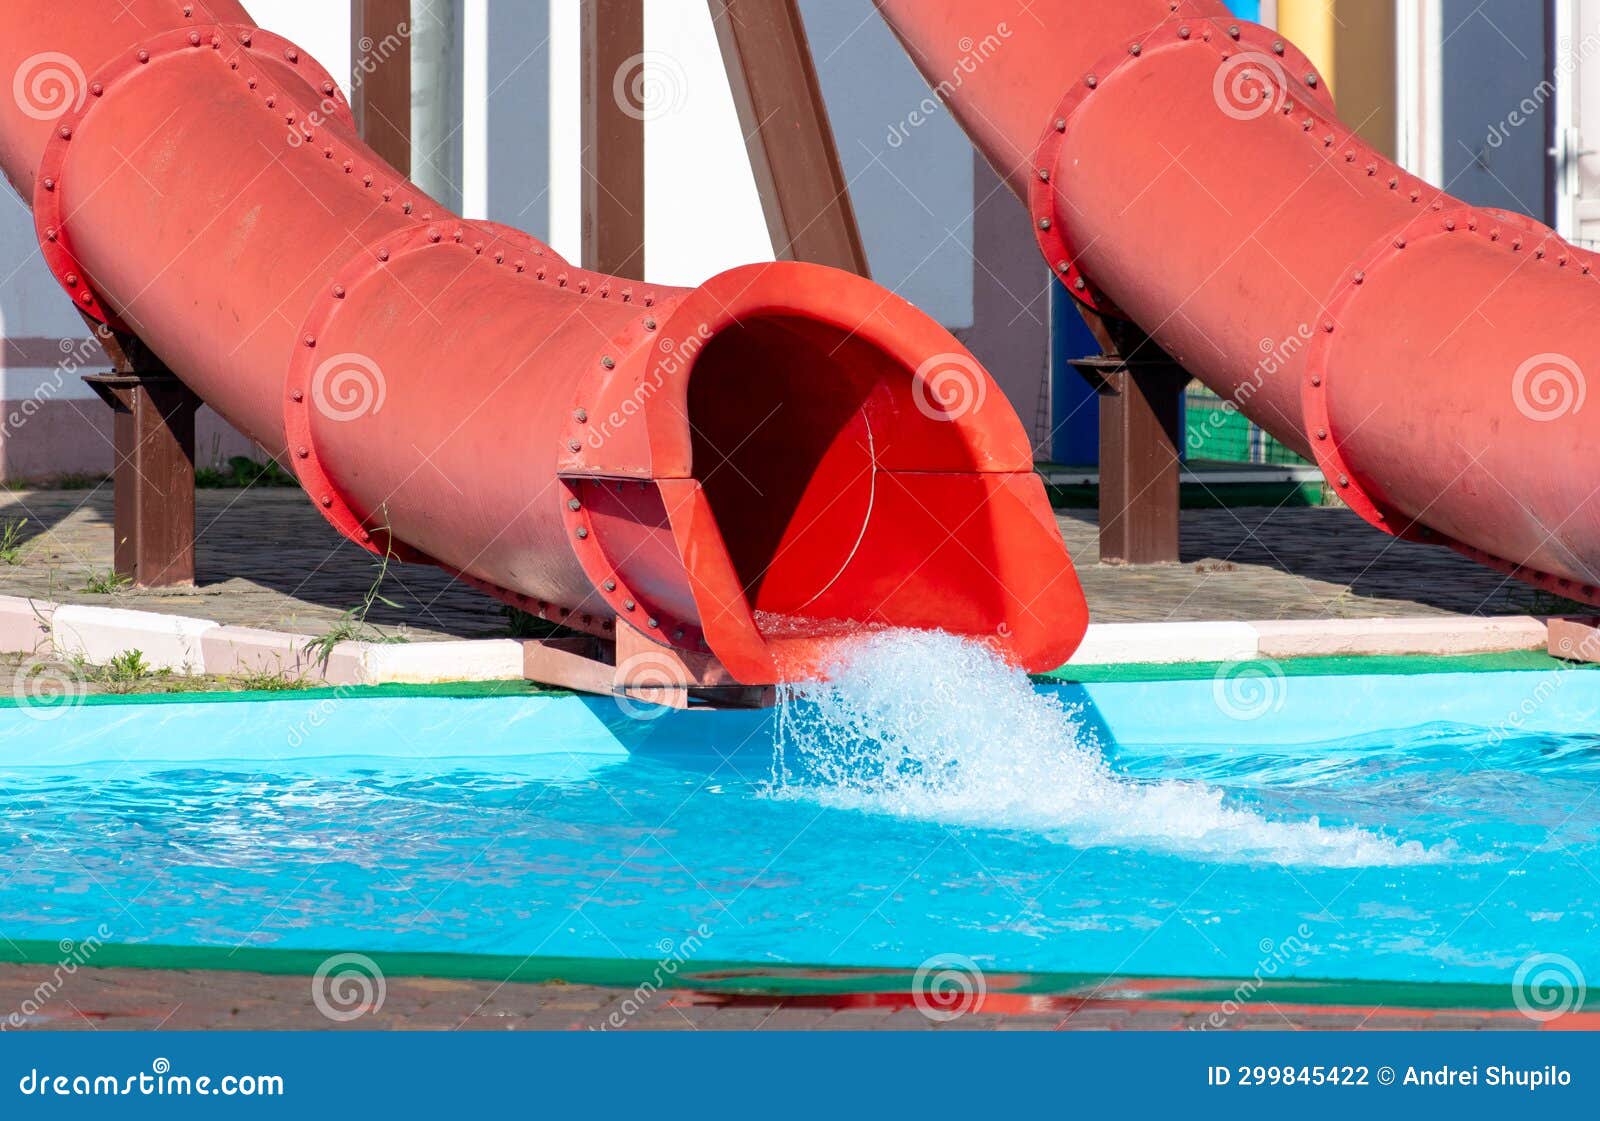 Red Slide in the Pool of the Water Park Stock Photo - Image of holiday ...